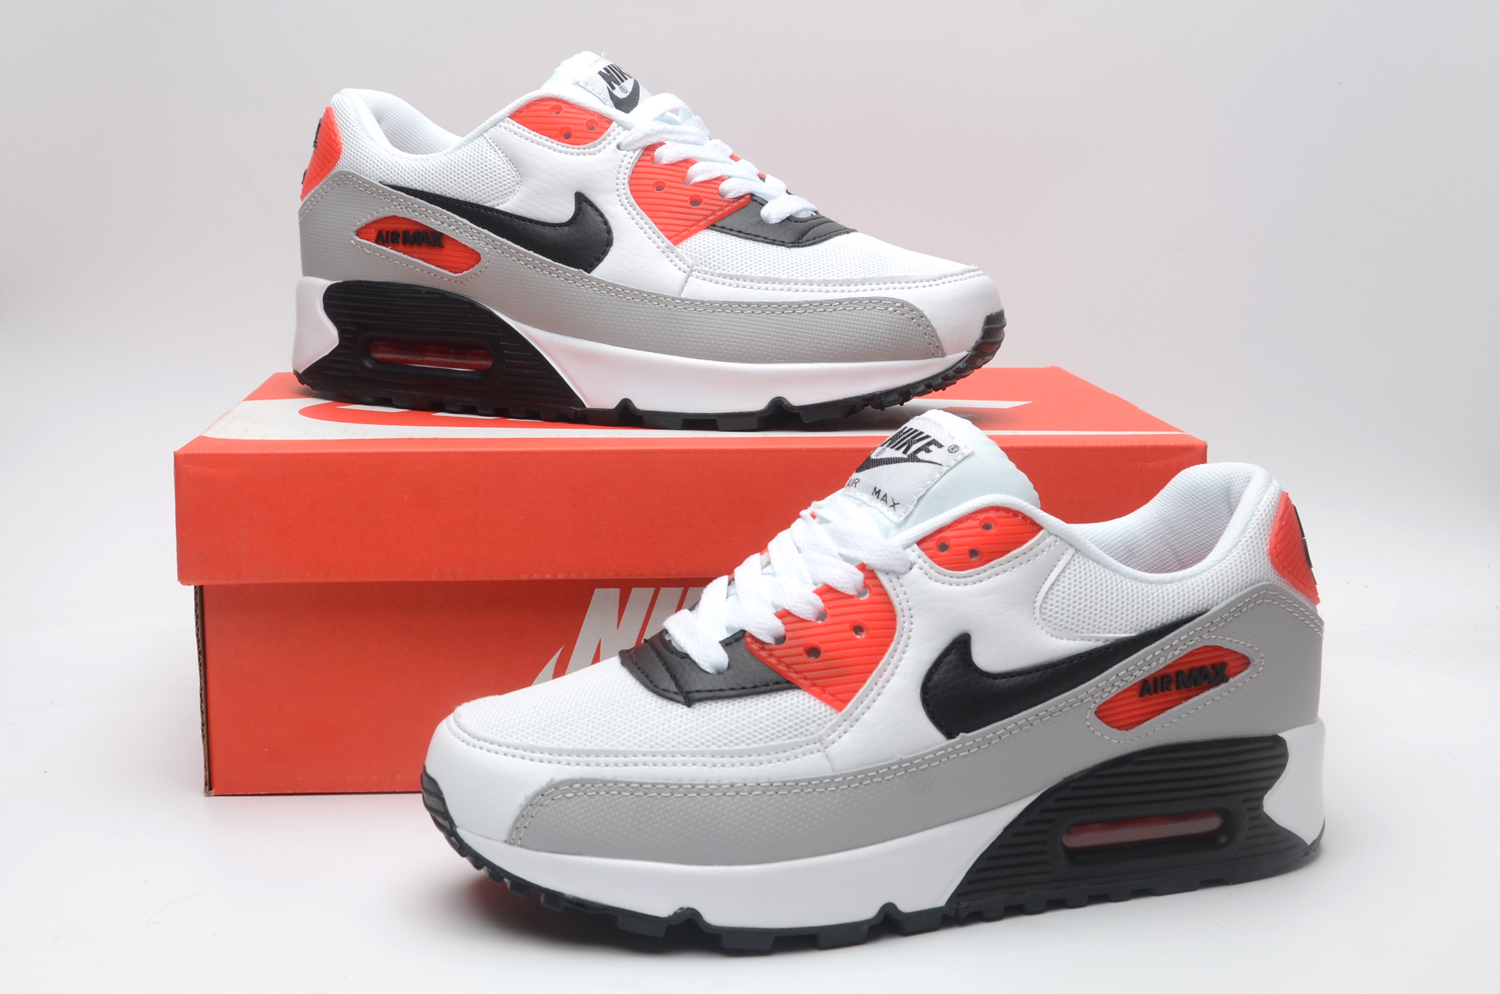 Women's Running weapon Air Max 90 Shoes 034